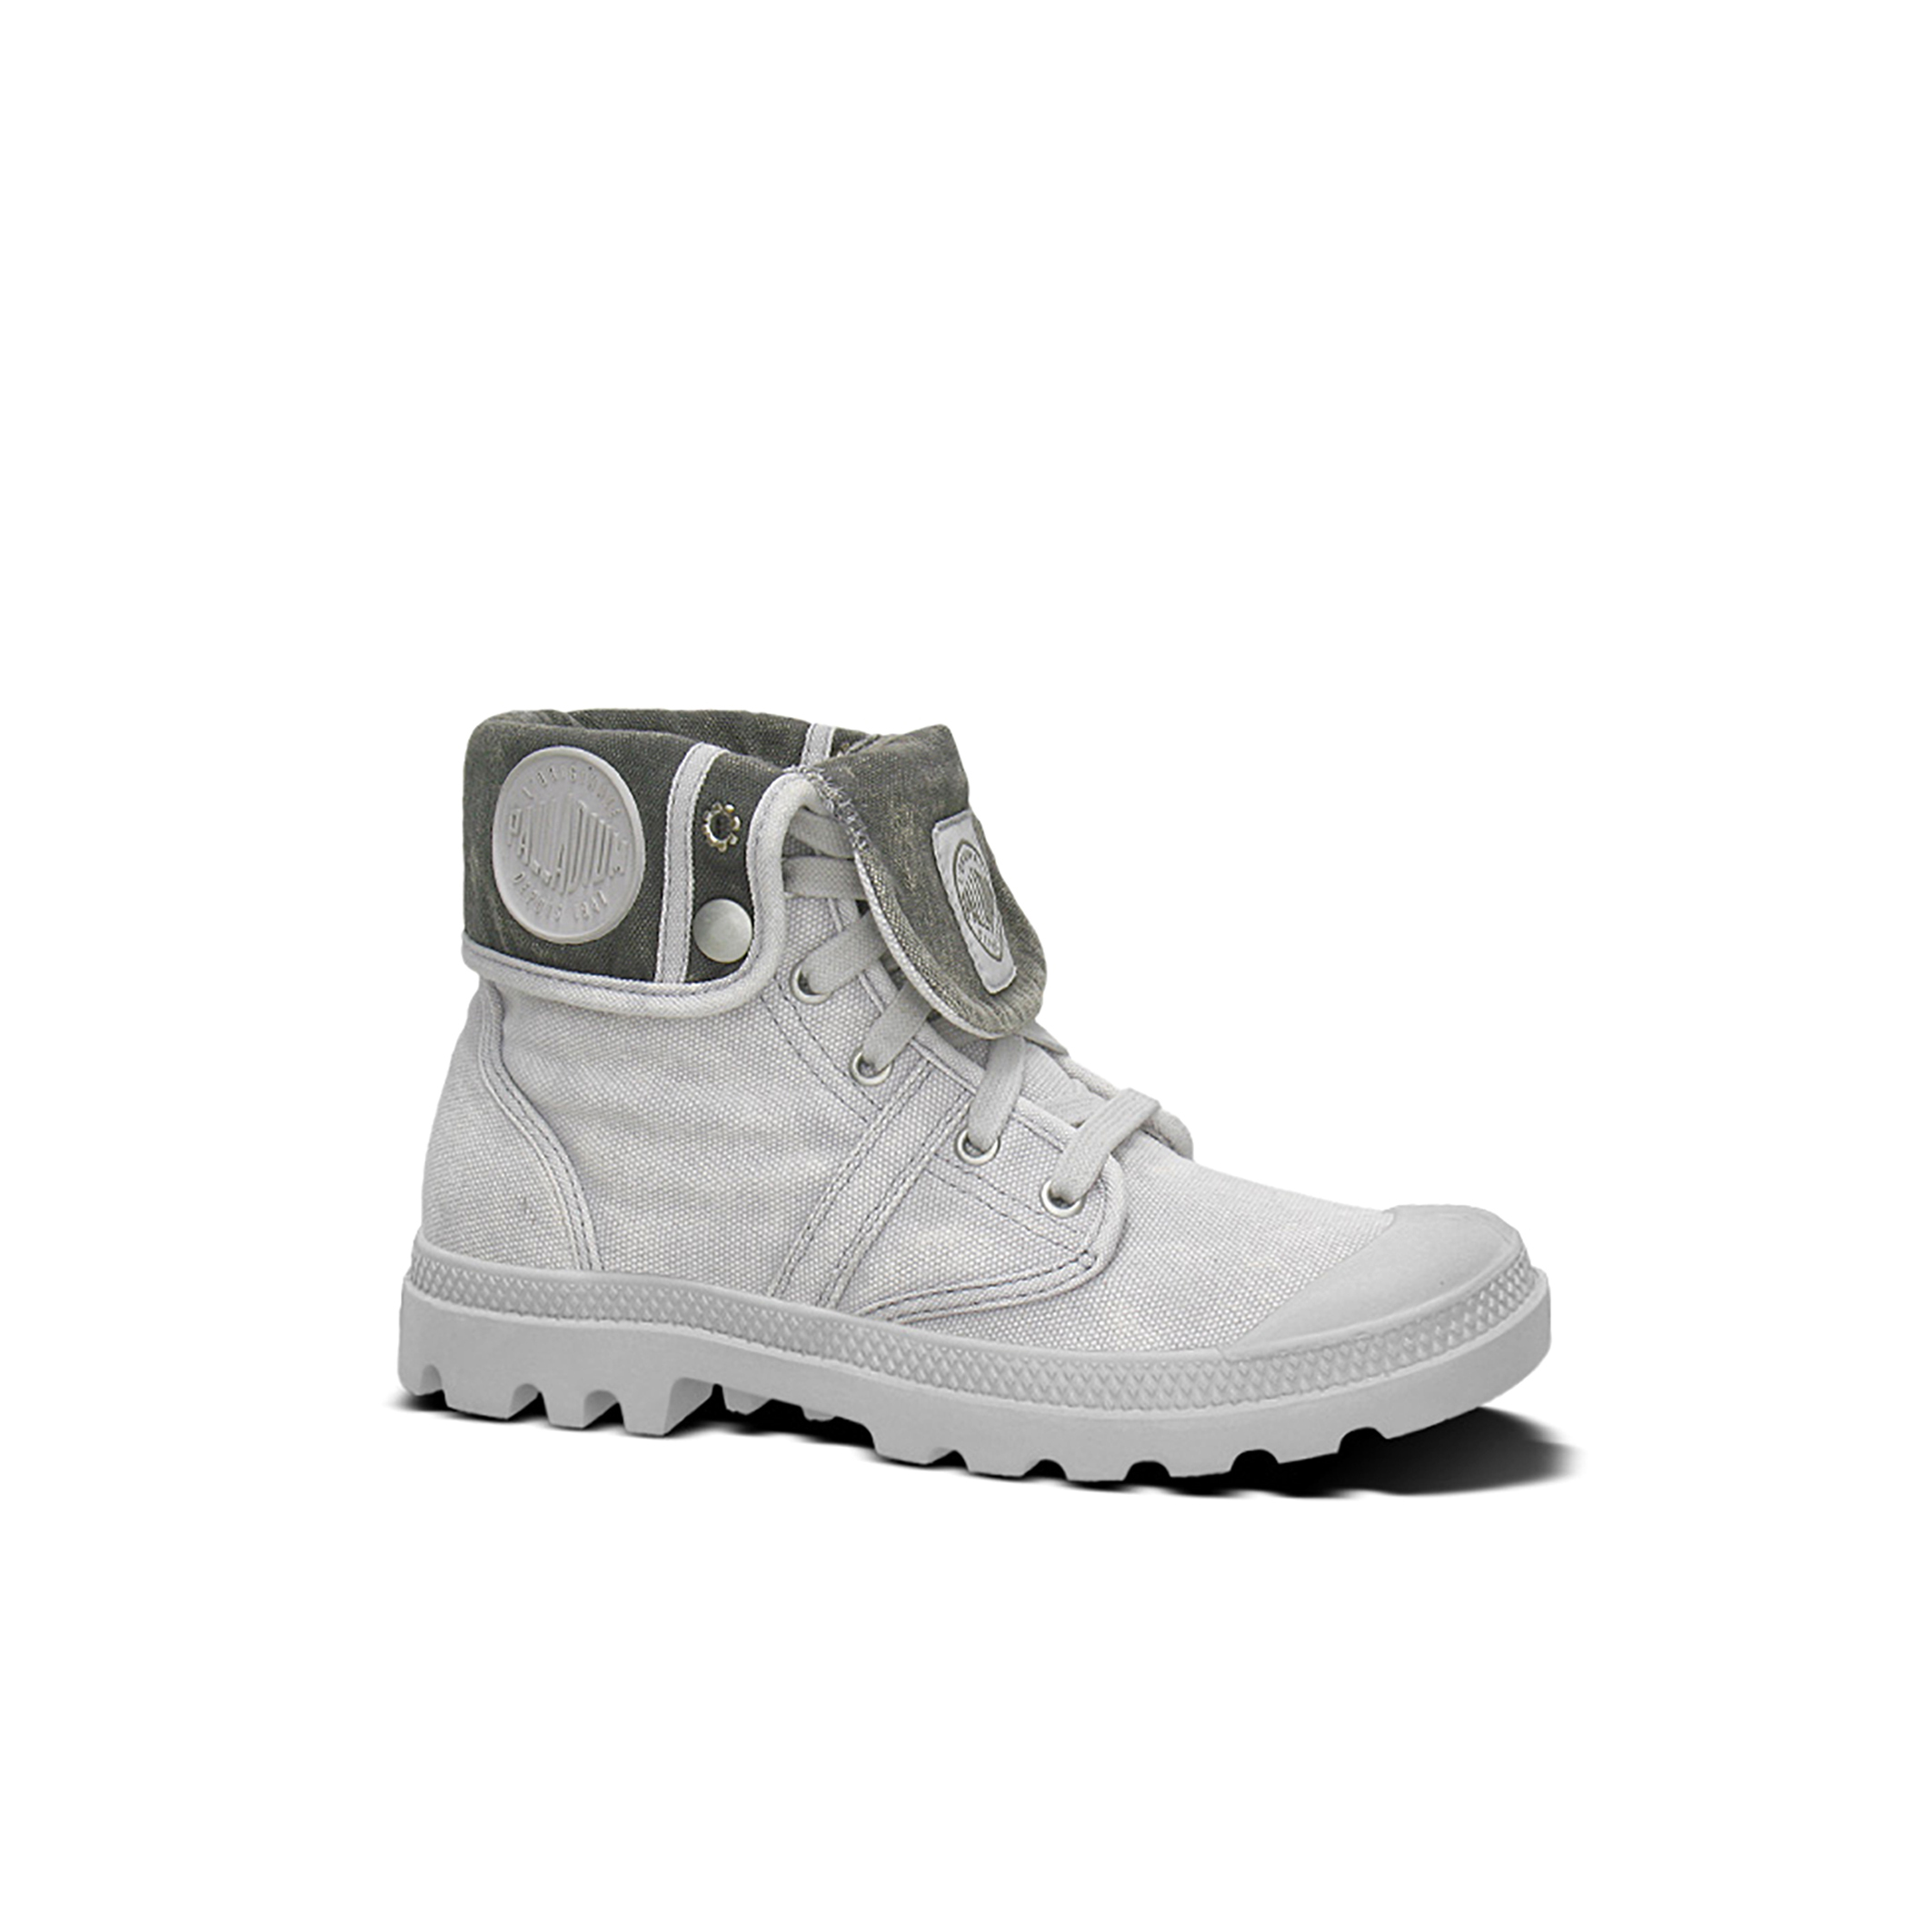 Discount 40% PALLADIUM Boots Ankle Boot Pallabrouse Unisex Shoes Canvas Sneakers